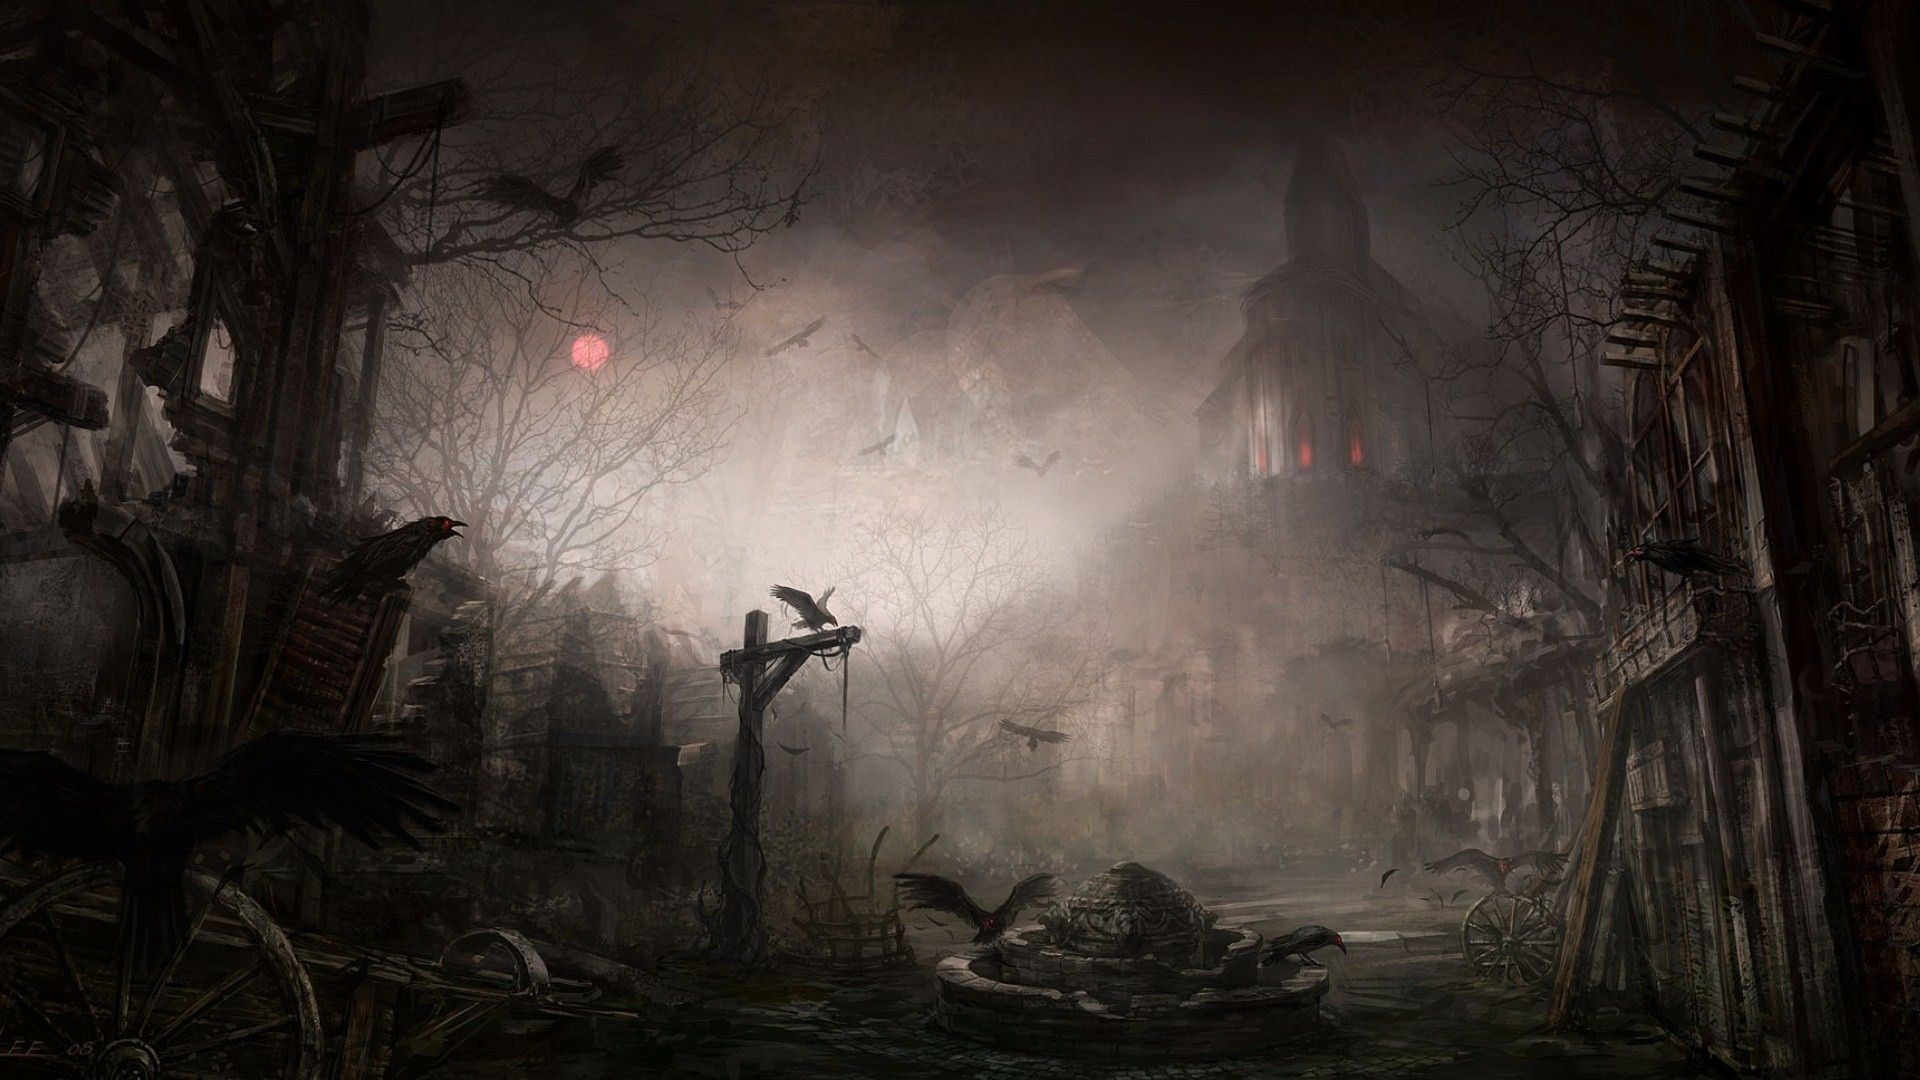 Creepy wallpaperDownload free awesome full HD background